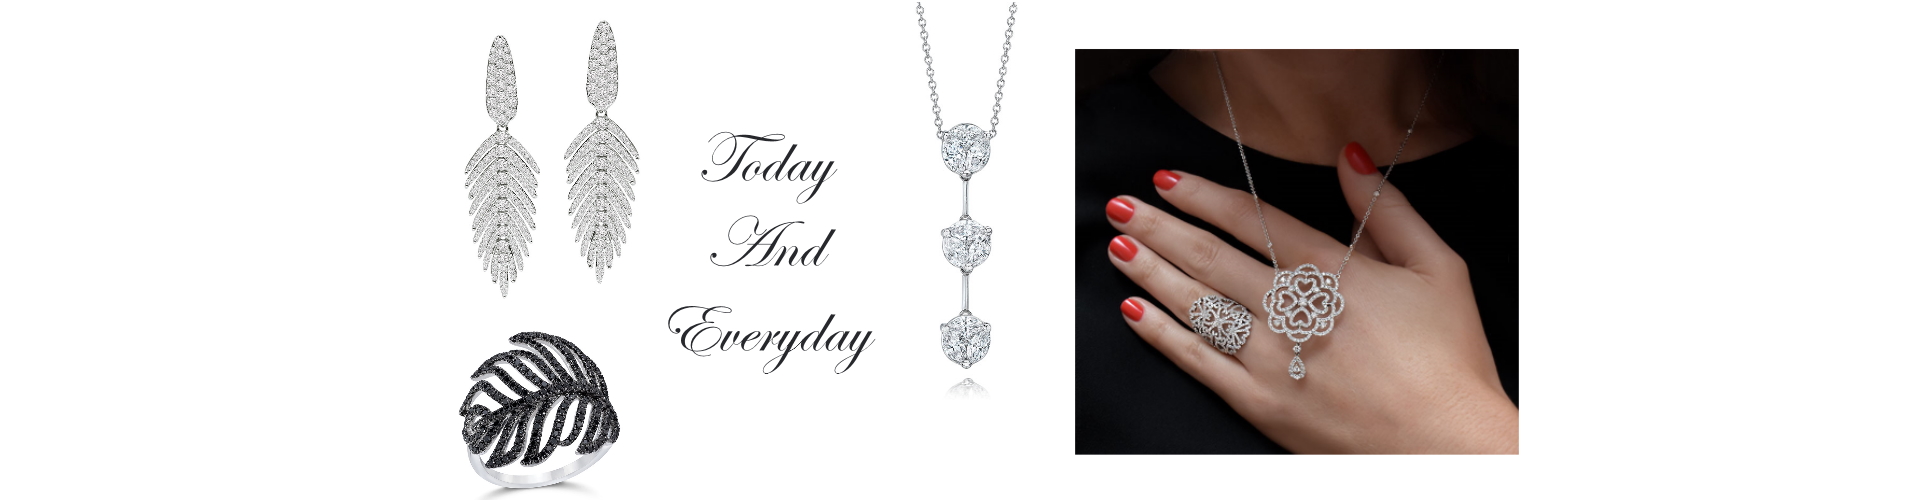 Cellini Jewelry Today and Everyday